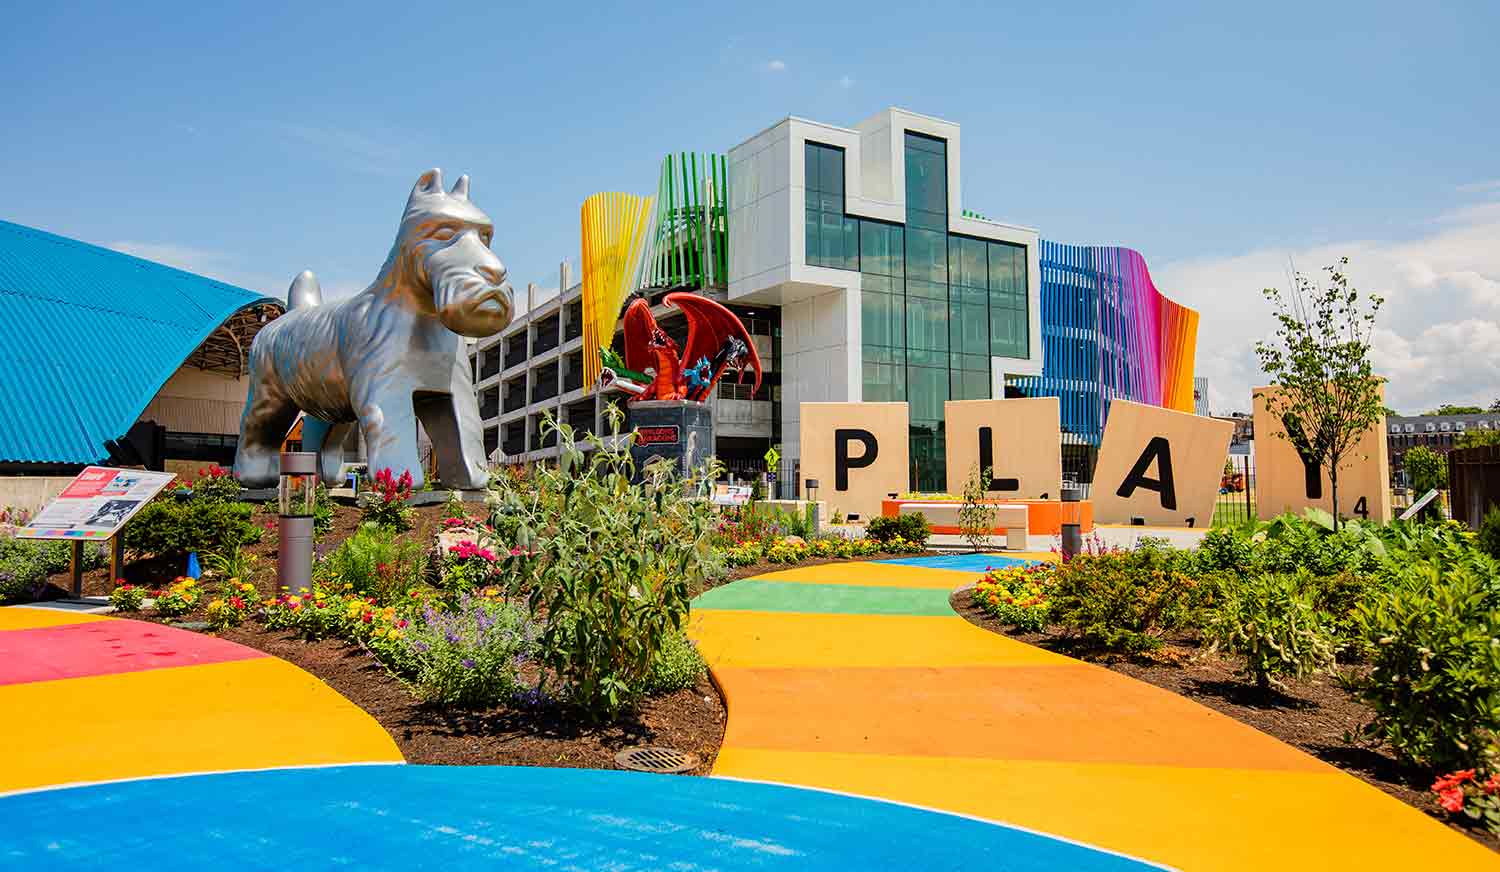 Giant Scrabble tiles spell the word play next to a giant Monopoly dog among colorful paths and plantings outside of a building.